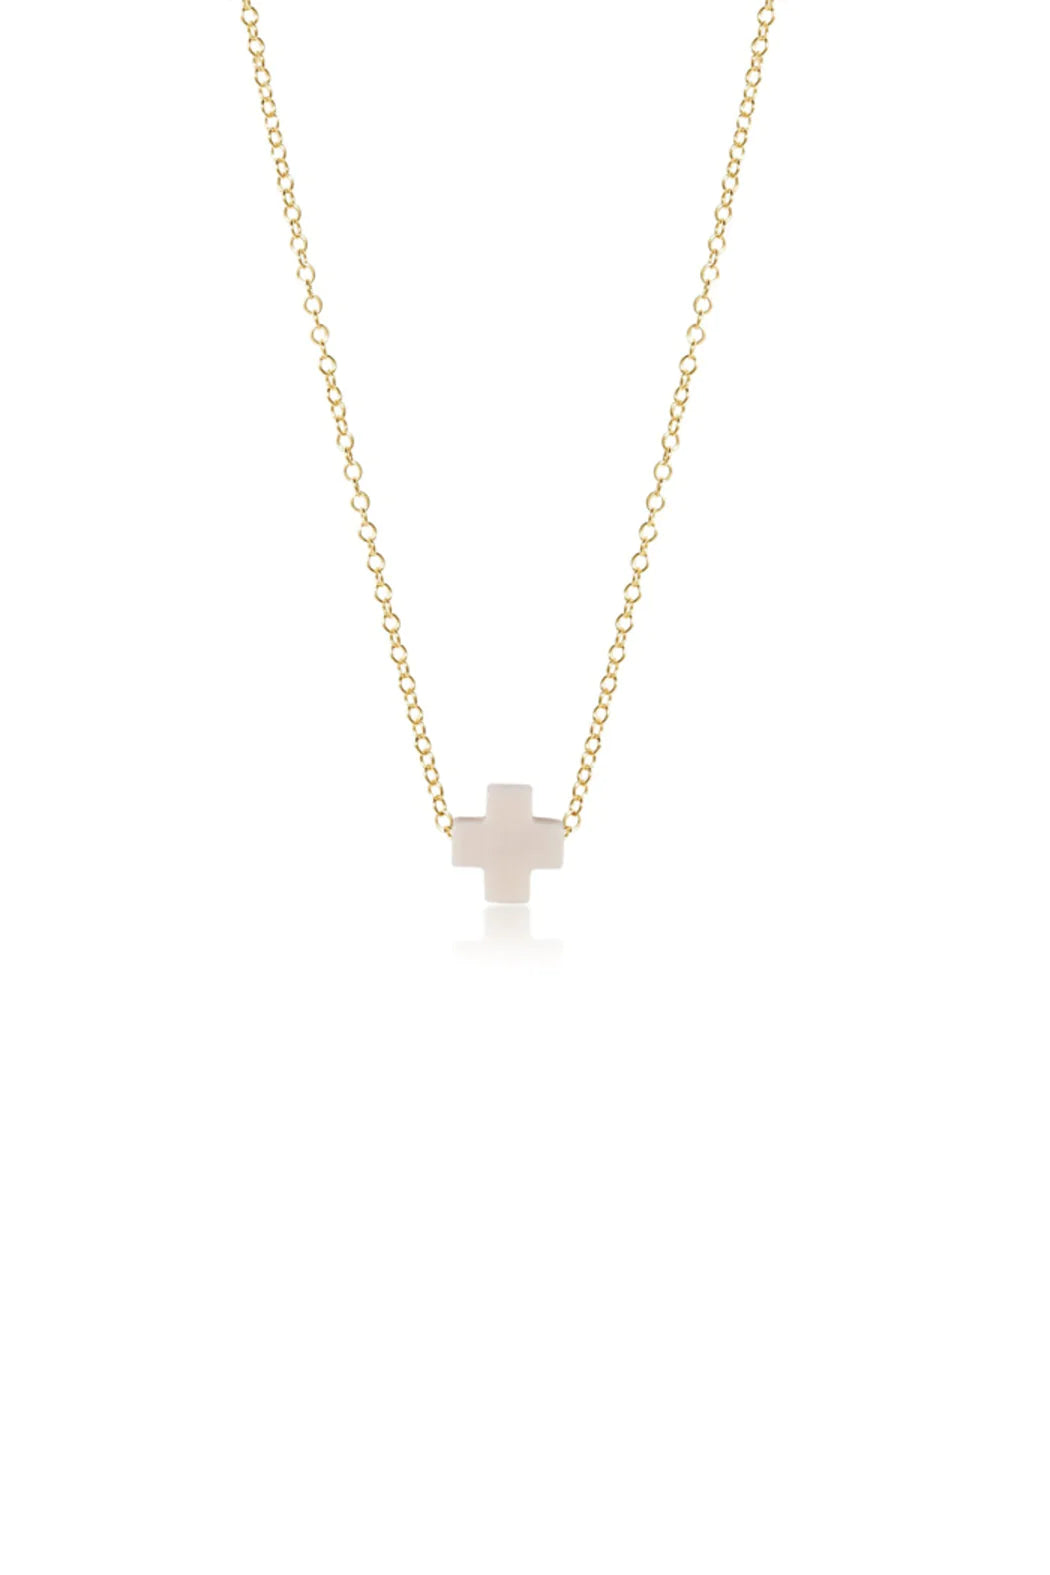 16" Necklace Gold - Signature Cross Off White